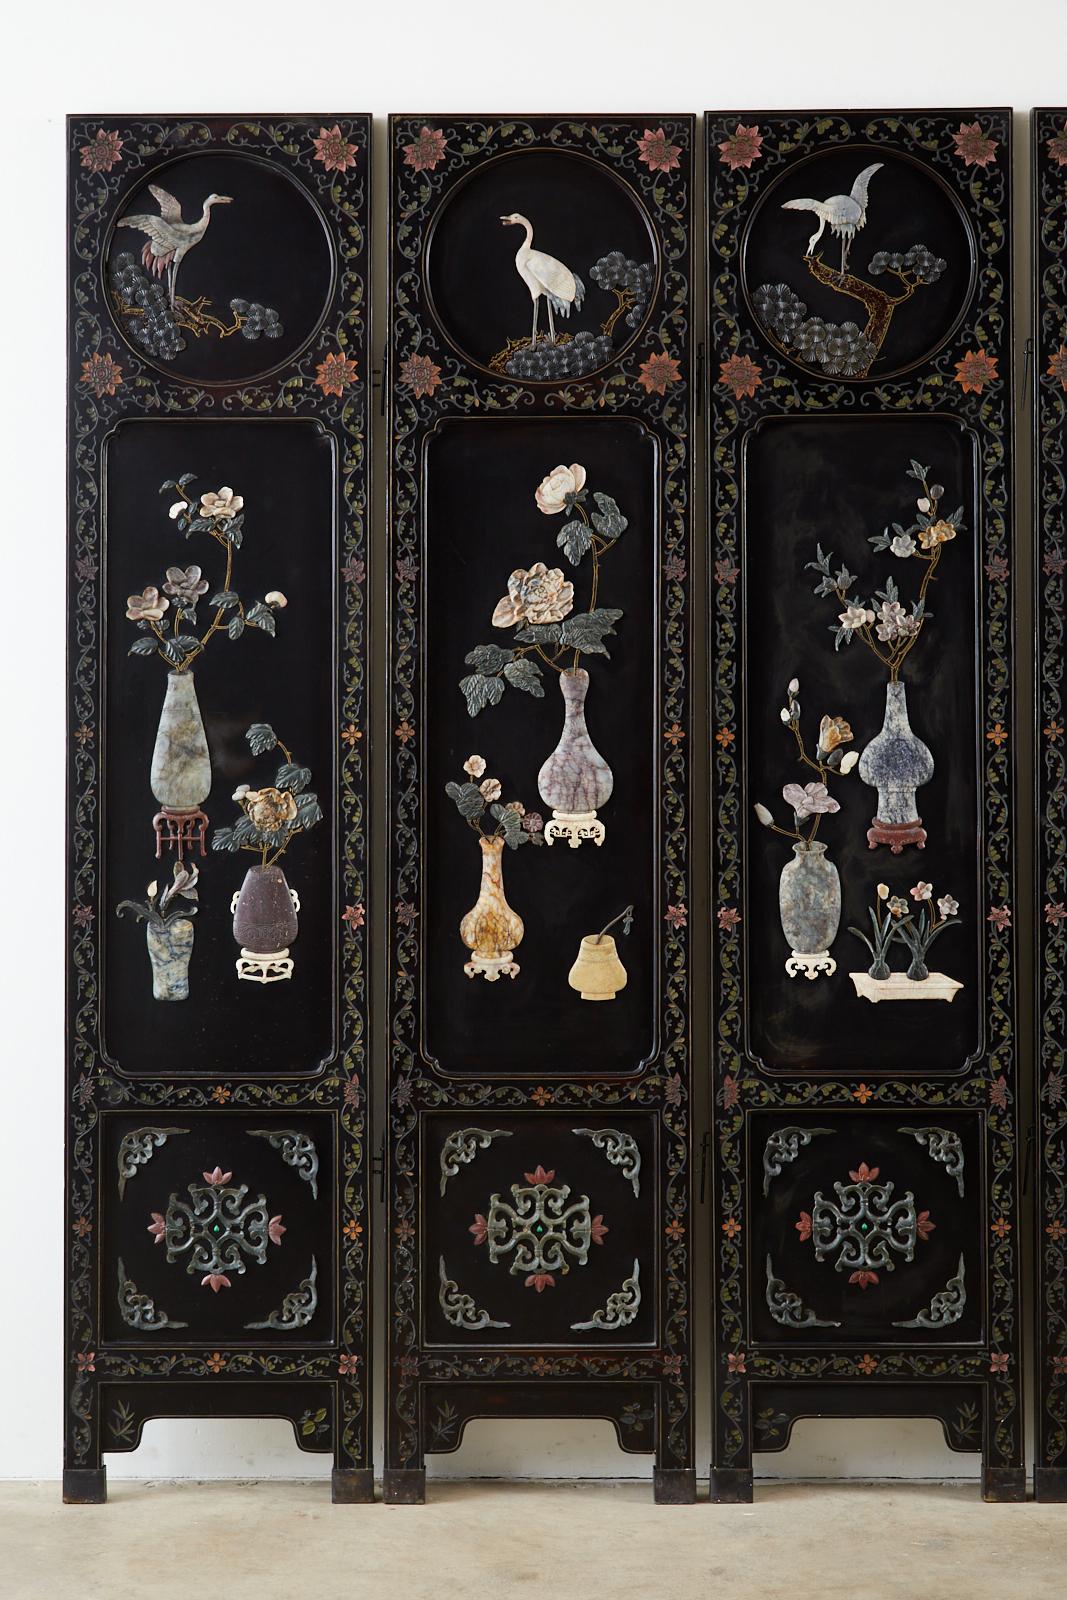 Exceptional Chinese export six-panel lacquered coromandel screen featuring intricately carved hardstone, soapstone, jade, and Shoushan stone from Northern Fujian. The folding panels are lacquered and have three inset windows depicting white